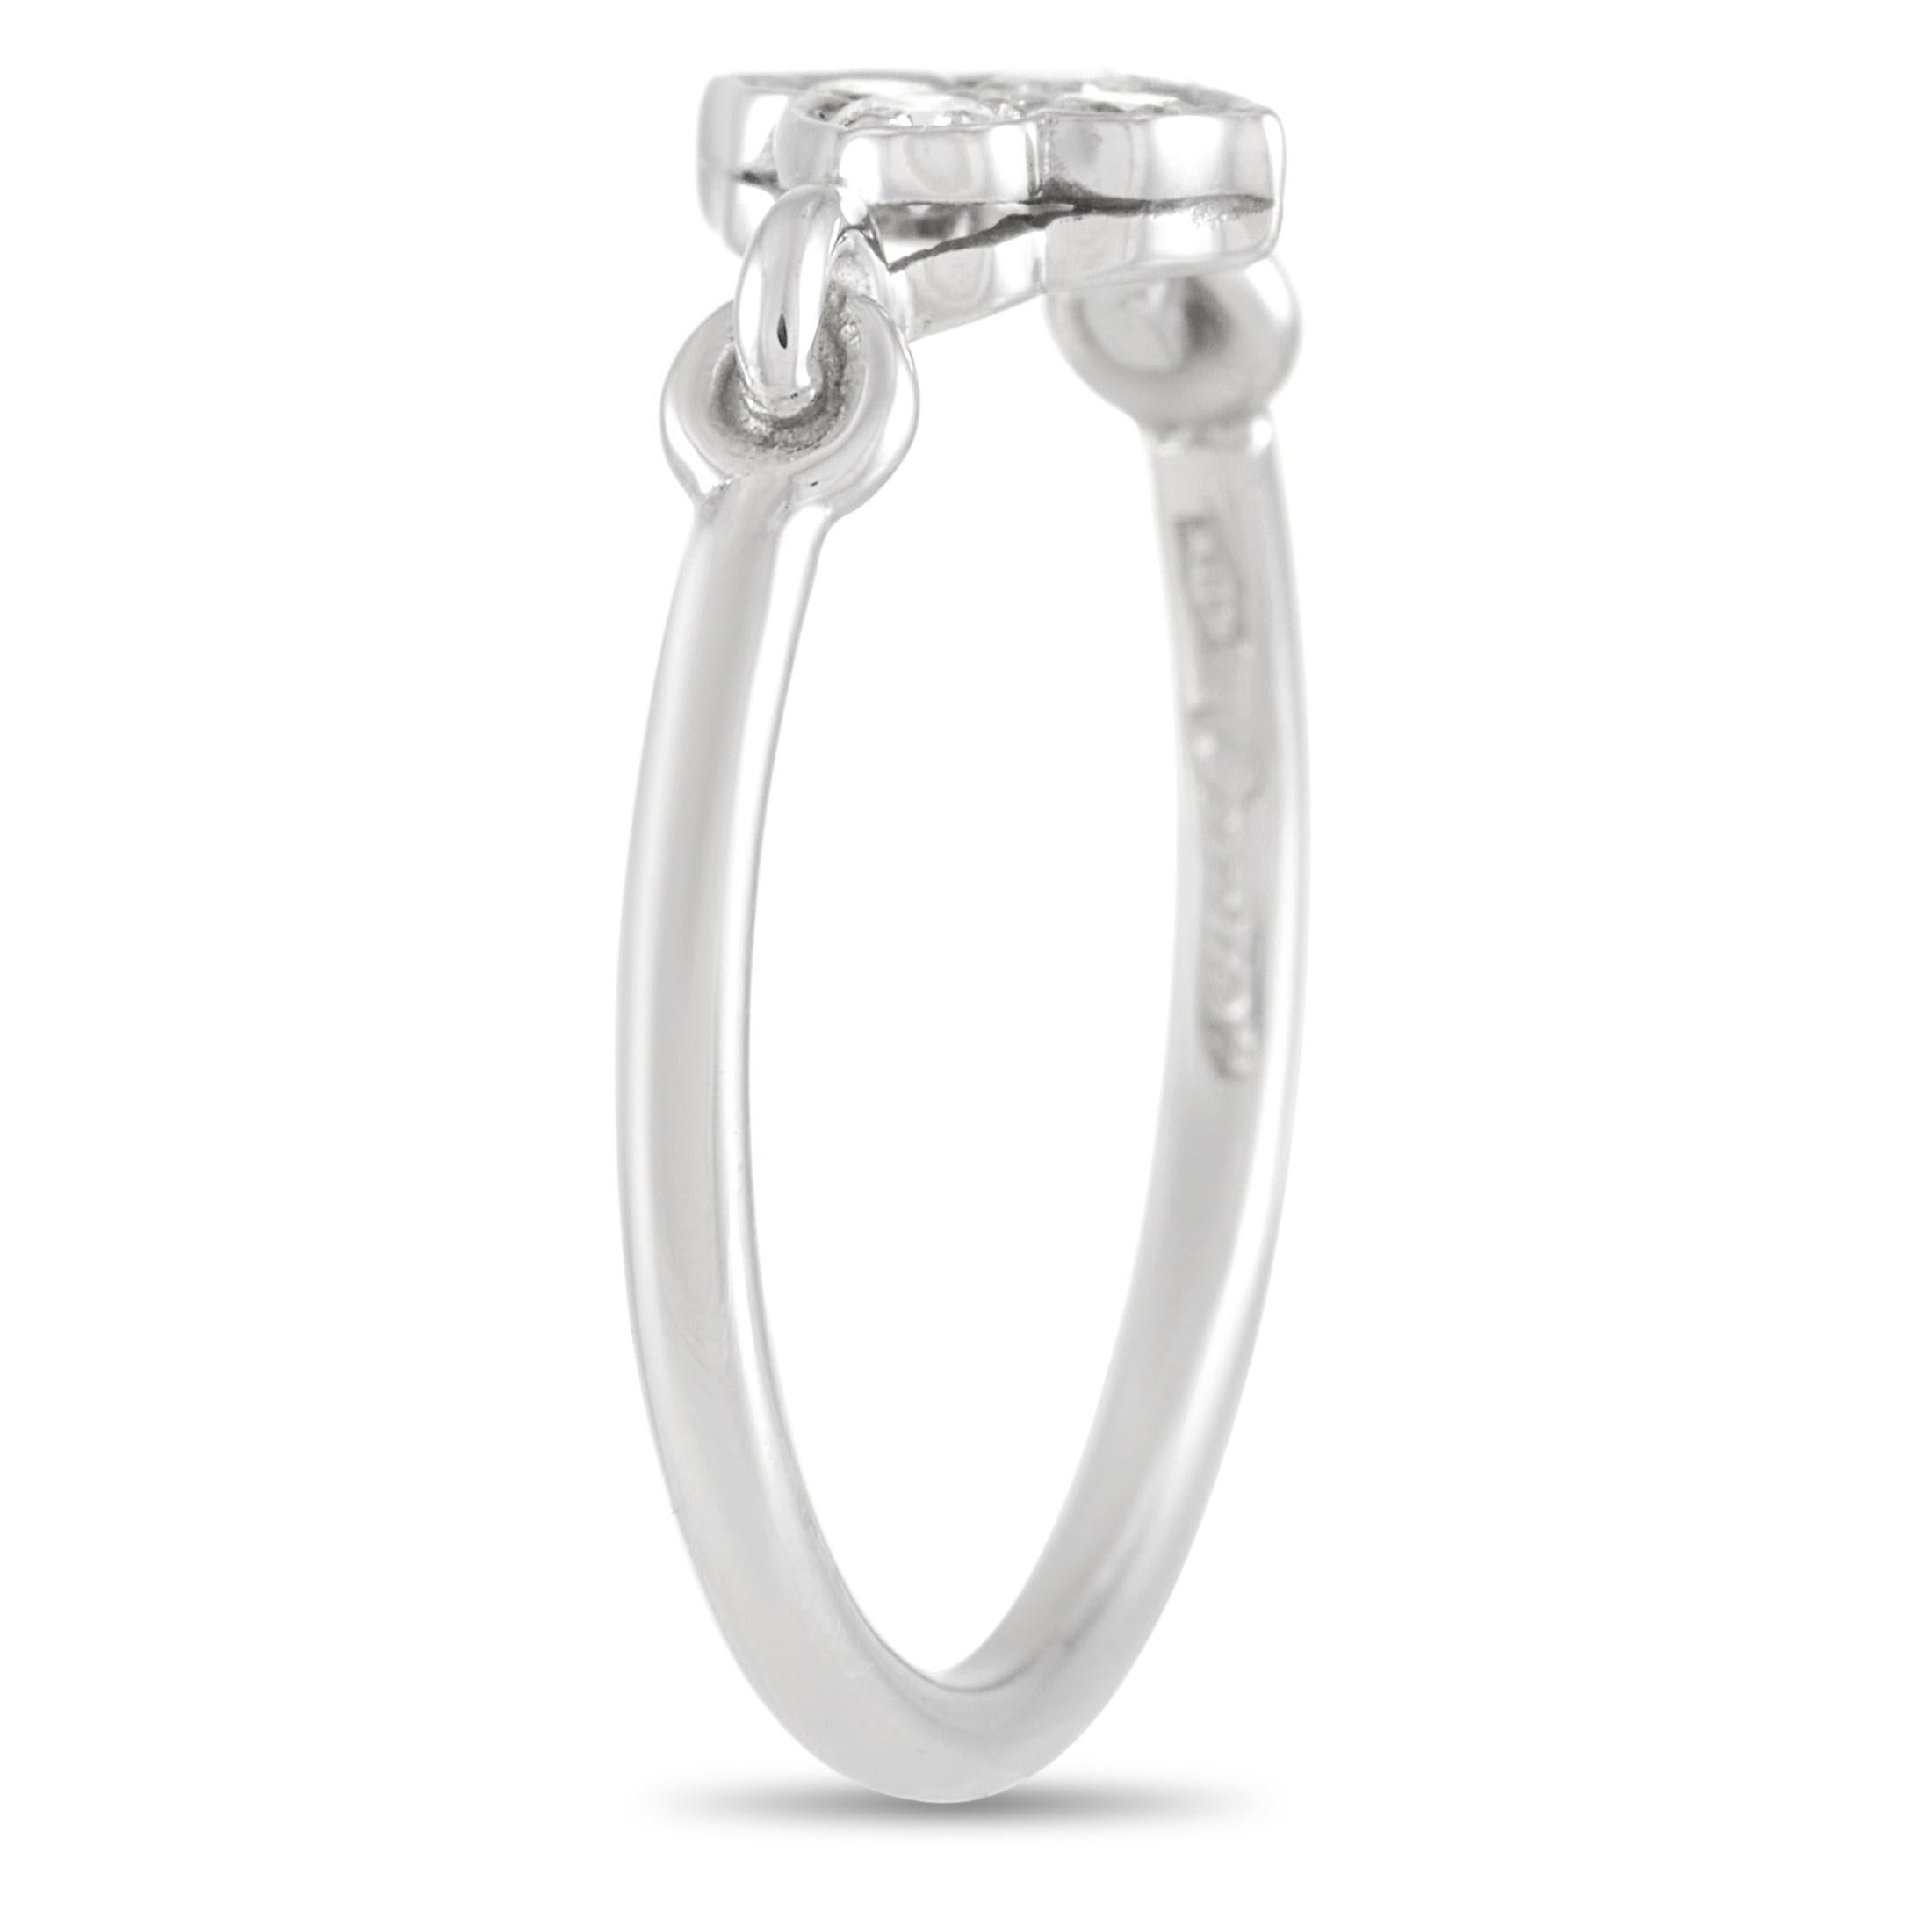 This Cartier Platinum Diamond Ring is a fun twist on a classic diamond ring. The ring is made with Platinum and is set with four round-cut diamonds in a pretty motif. The diamond motif is connected to the rest of the band with interlocking platinum